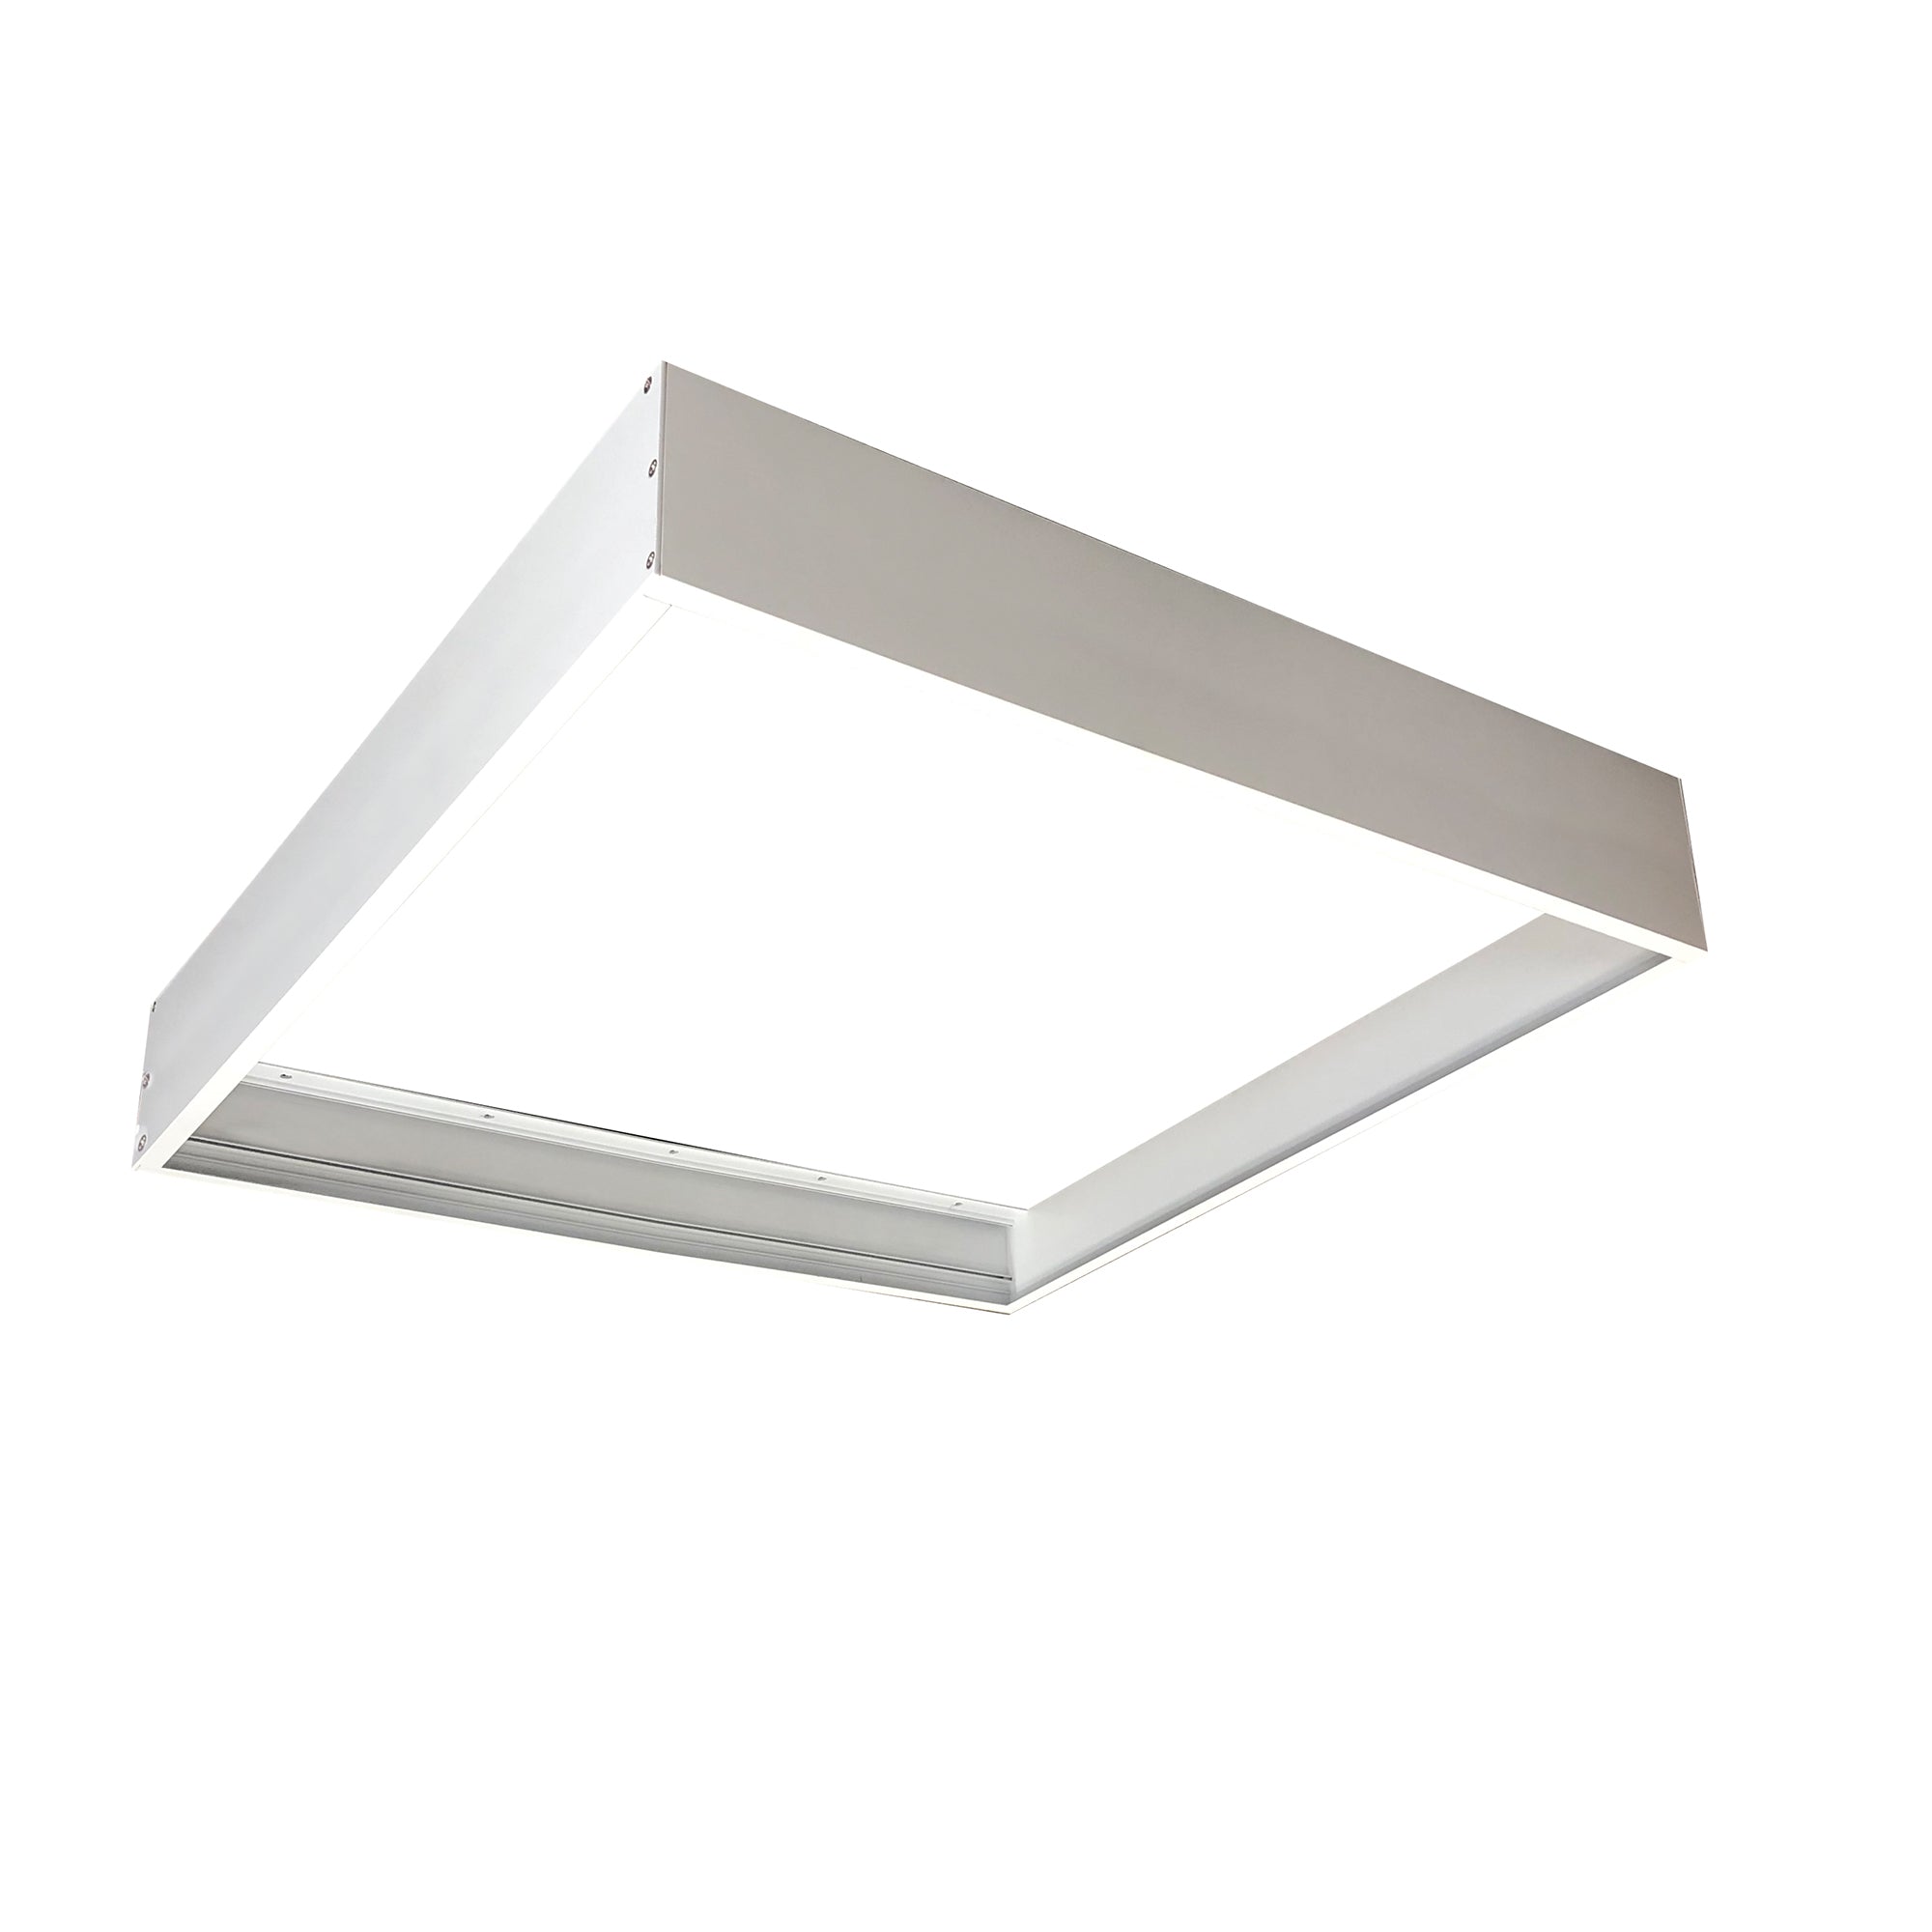 Nora Lighting NPDBL-22DDFK/W - Recessed - Surface Mounting Frame for 2'x2' LED Backlit Panels with Emergency